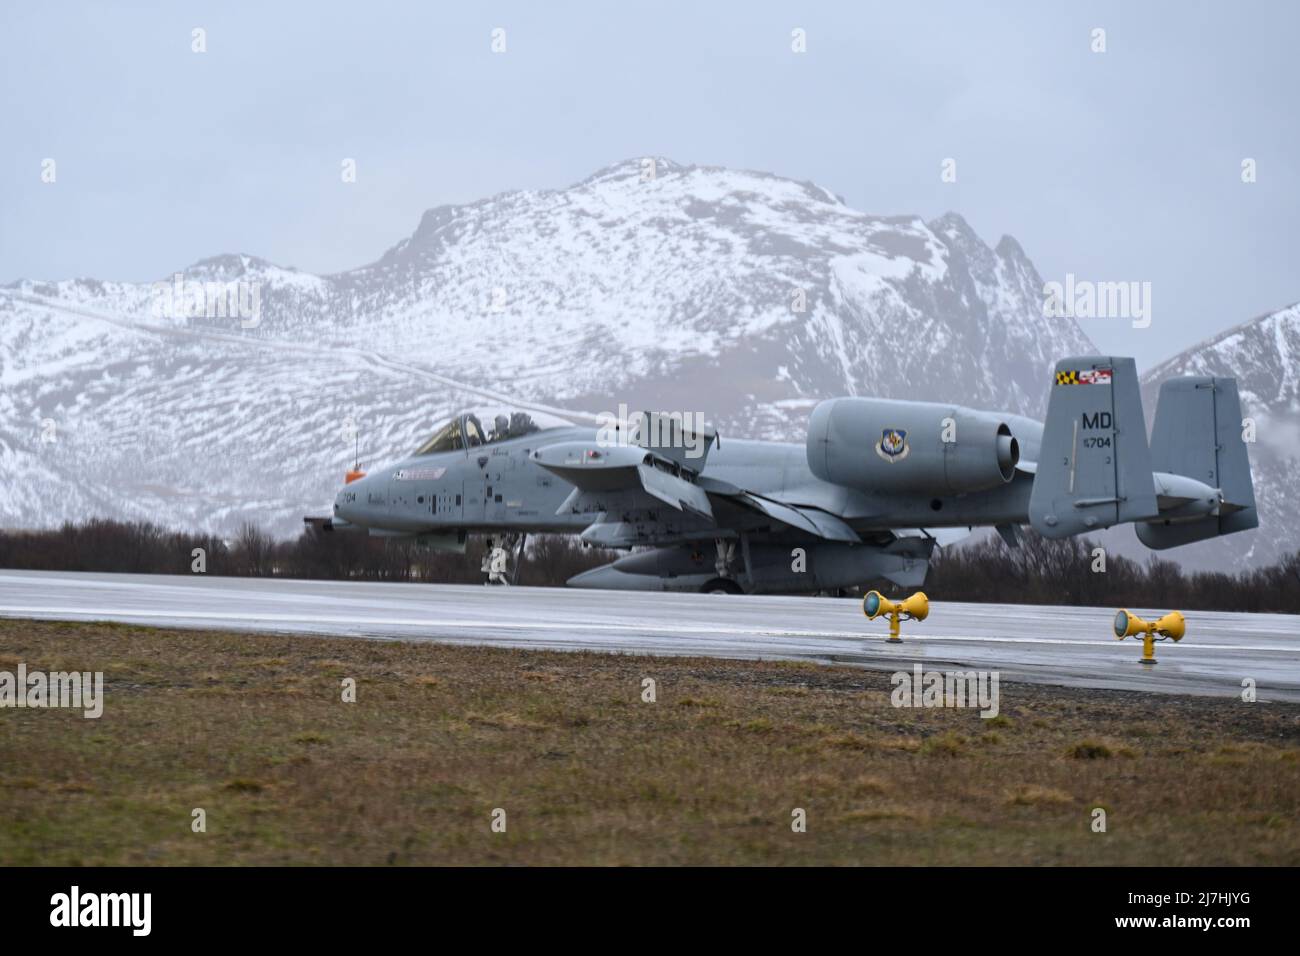 Andenes, Norway. 06 May, 2022. A U.S. Air Force A-10C Thunderbolt II ground attack aircraft assigned to the 104th Fighter Squadron, taxis after arrival at Andoya Air Base, May 6, 2022 in Andenes, Norway. The aircraft will conduct Agile Combat Employment training in support of multi-national exercise Swift Response exercise. Credit: TSgt. Enjoli Saunders/U.S Air Force/Alamy Live News Stock Photo